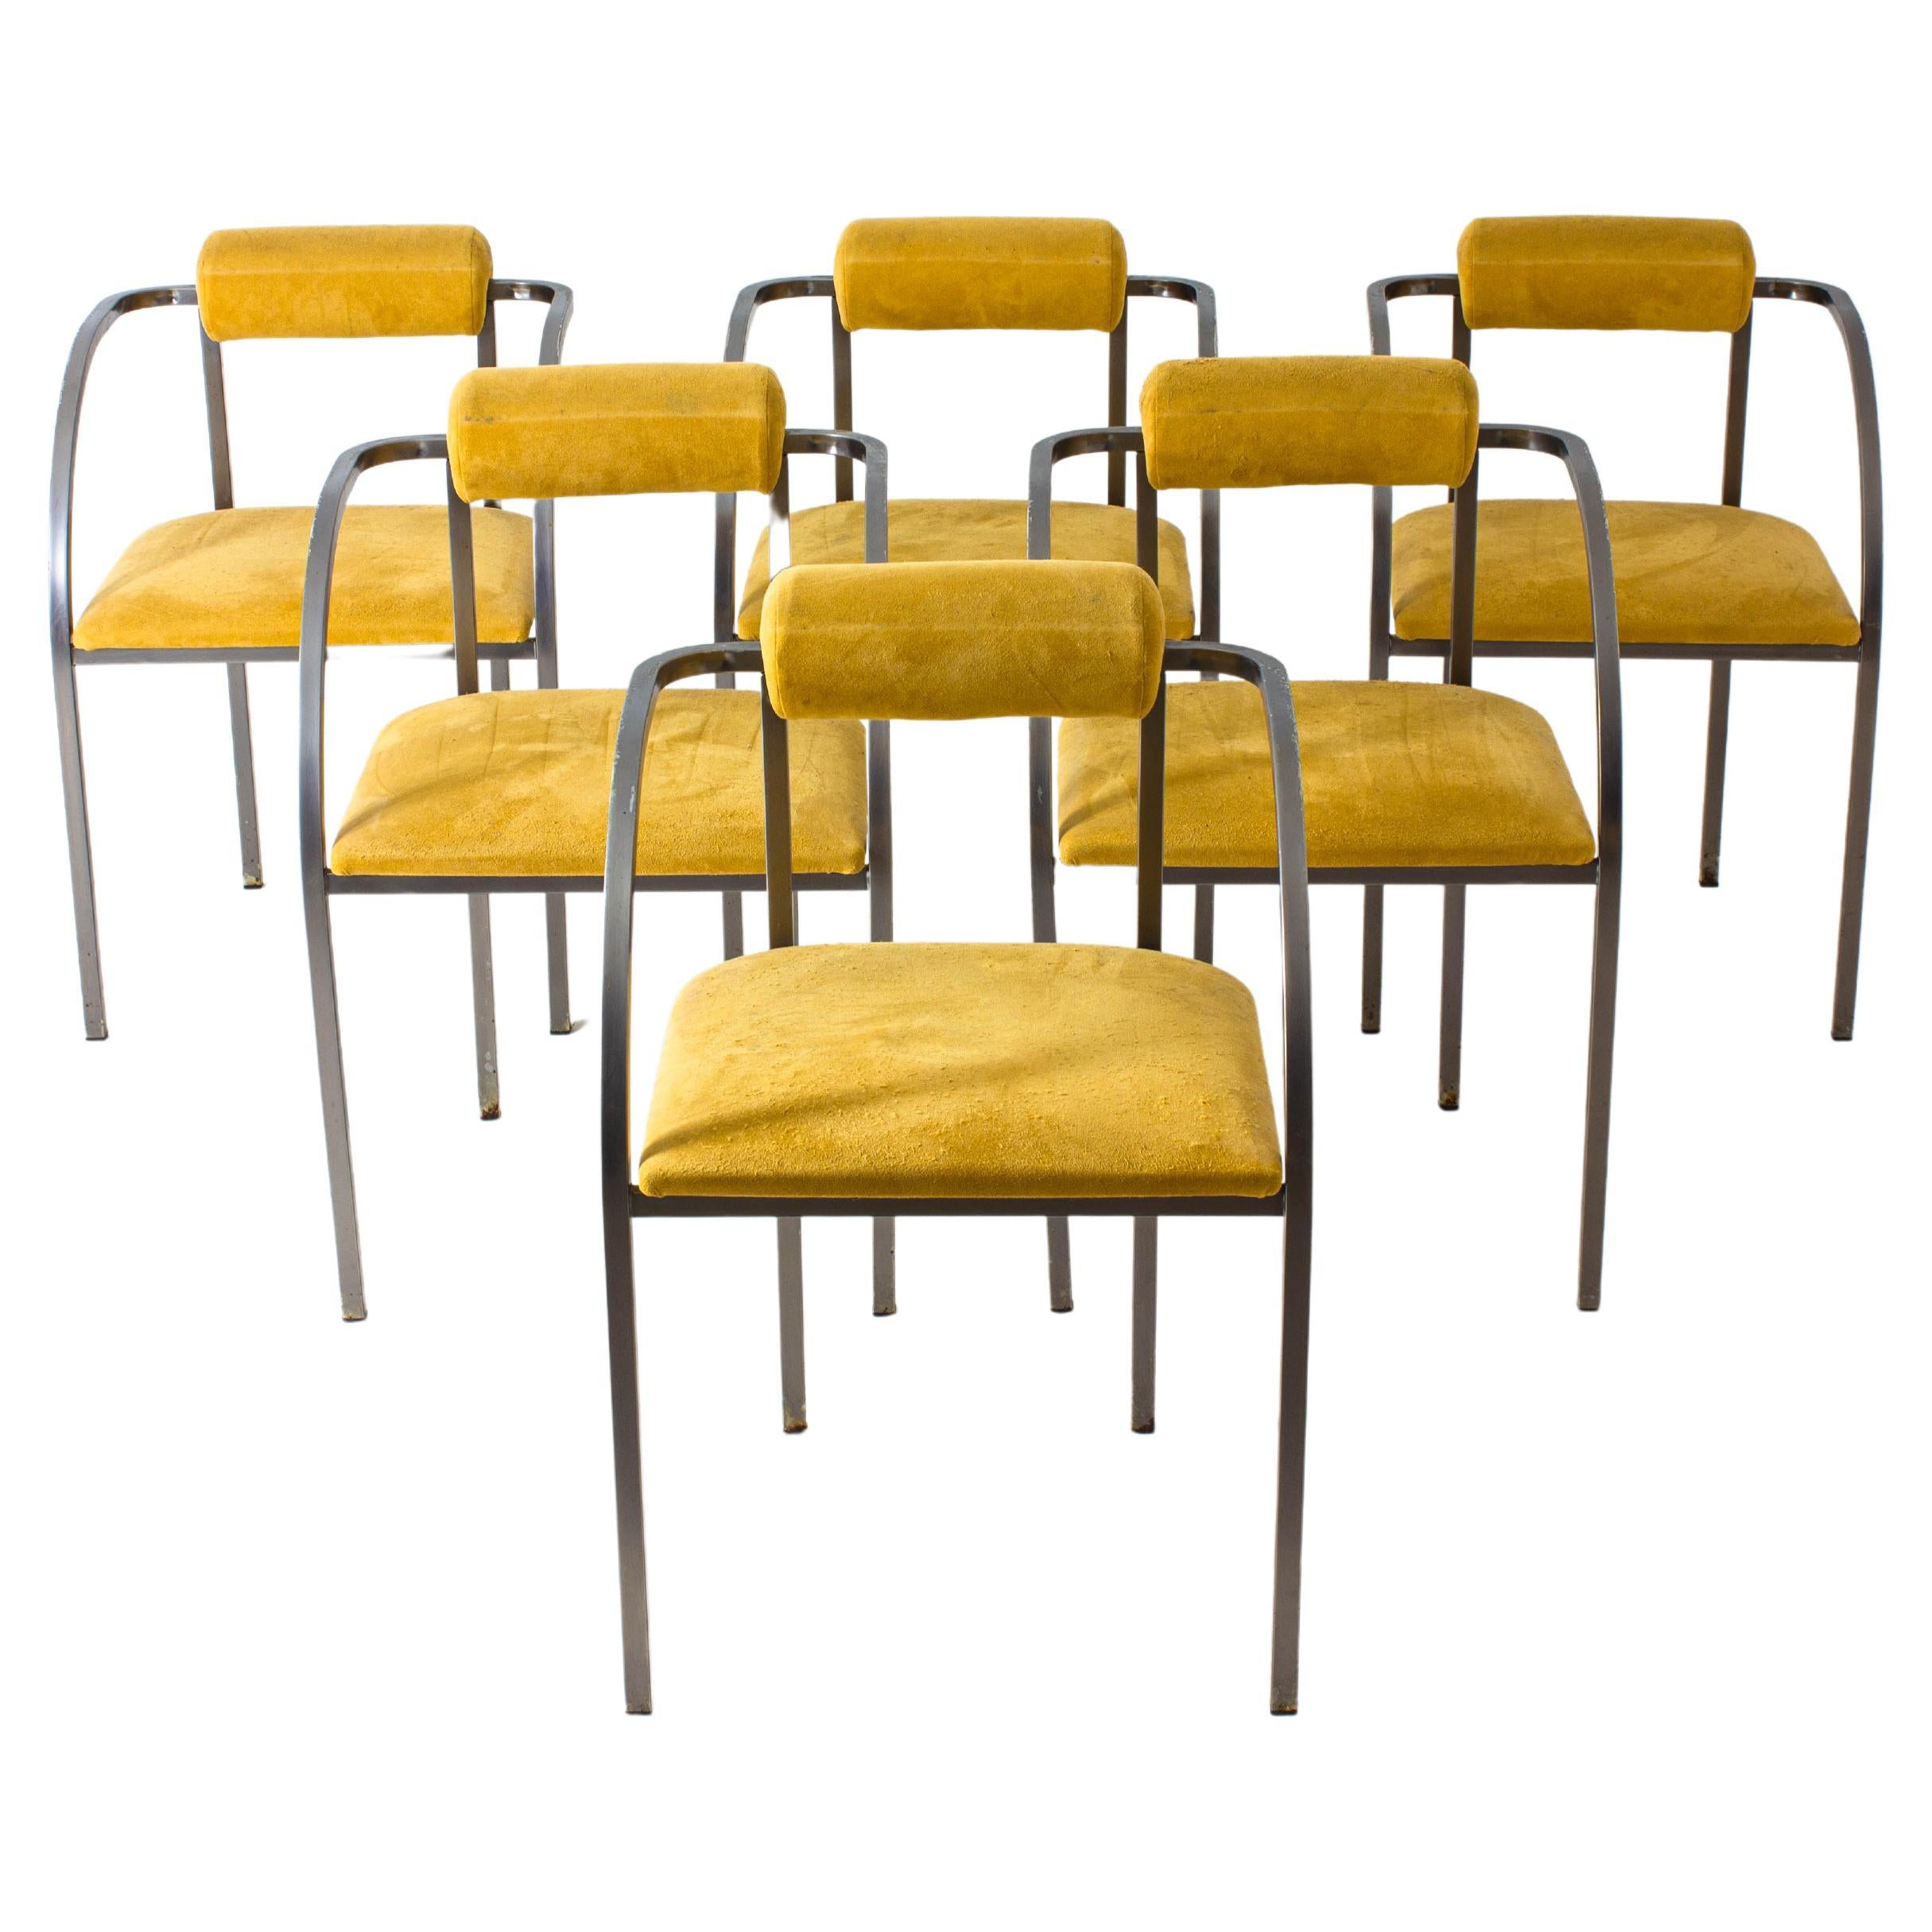 Set of 6 yellow dining chairs by Belgochrom, 1980s